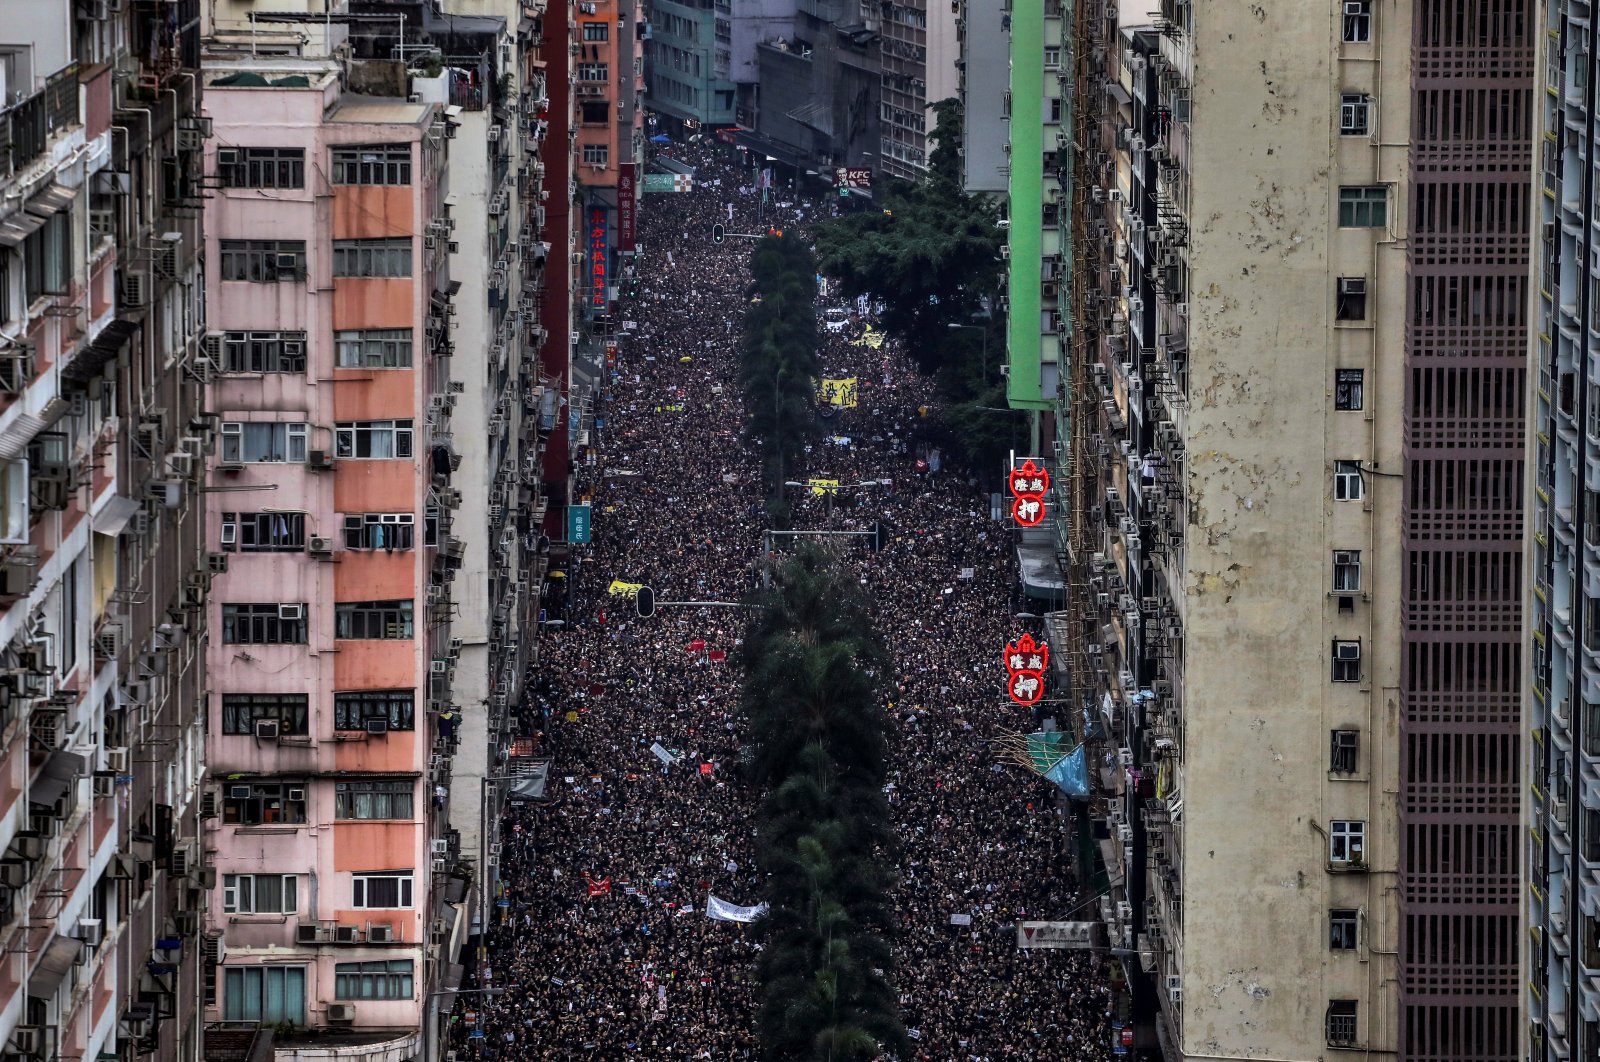 Hundreds of thousands protesters march through the streets of Hong Kong, China, June 16, 2019. (Reuters Photo)